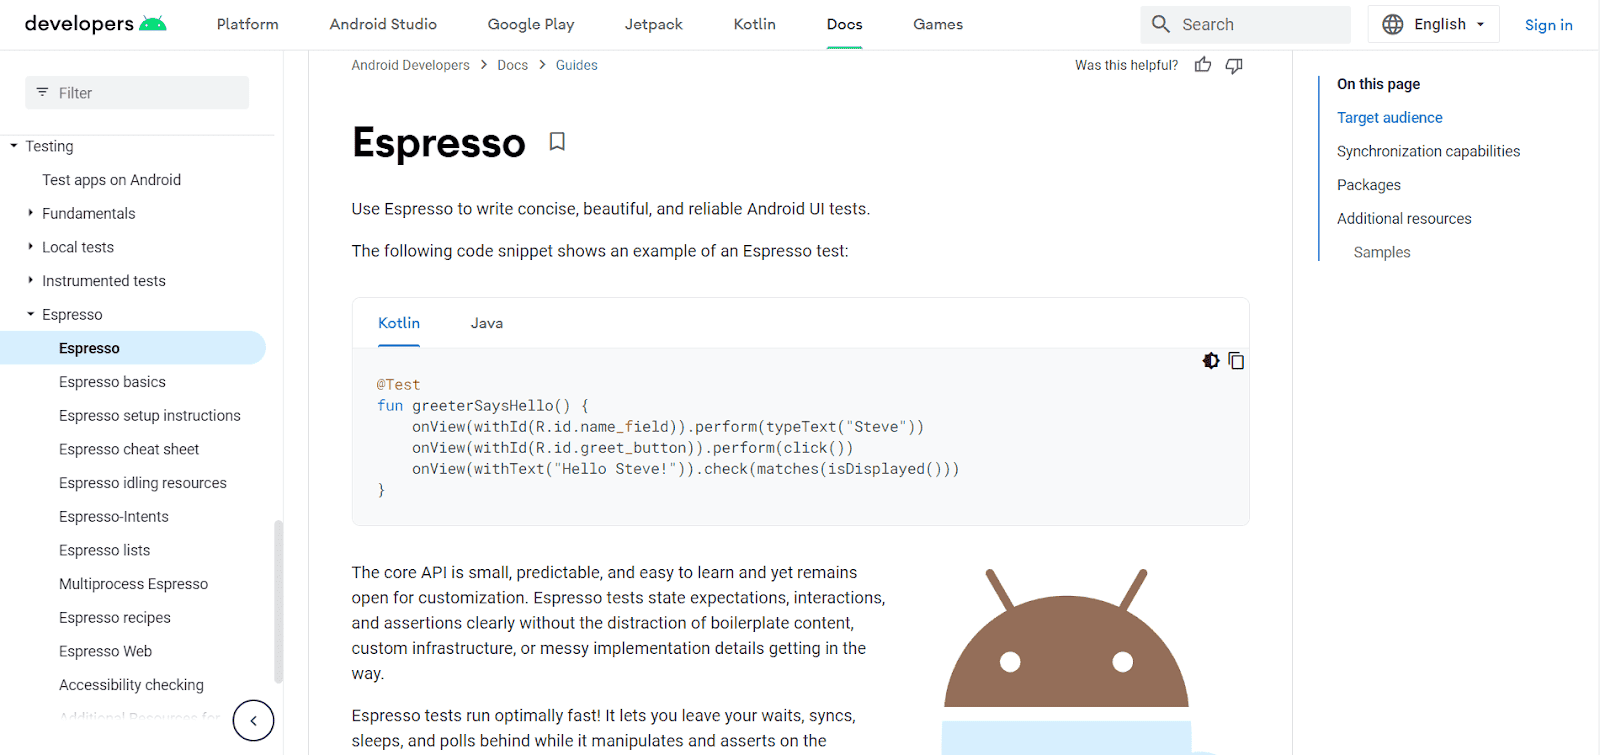 Espresso, developed by Google, is a leading Android automation testing framework